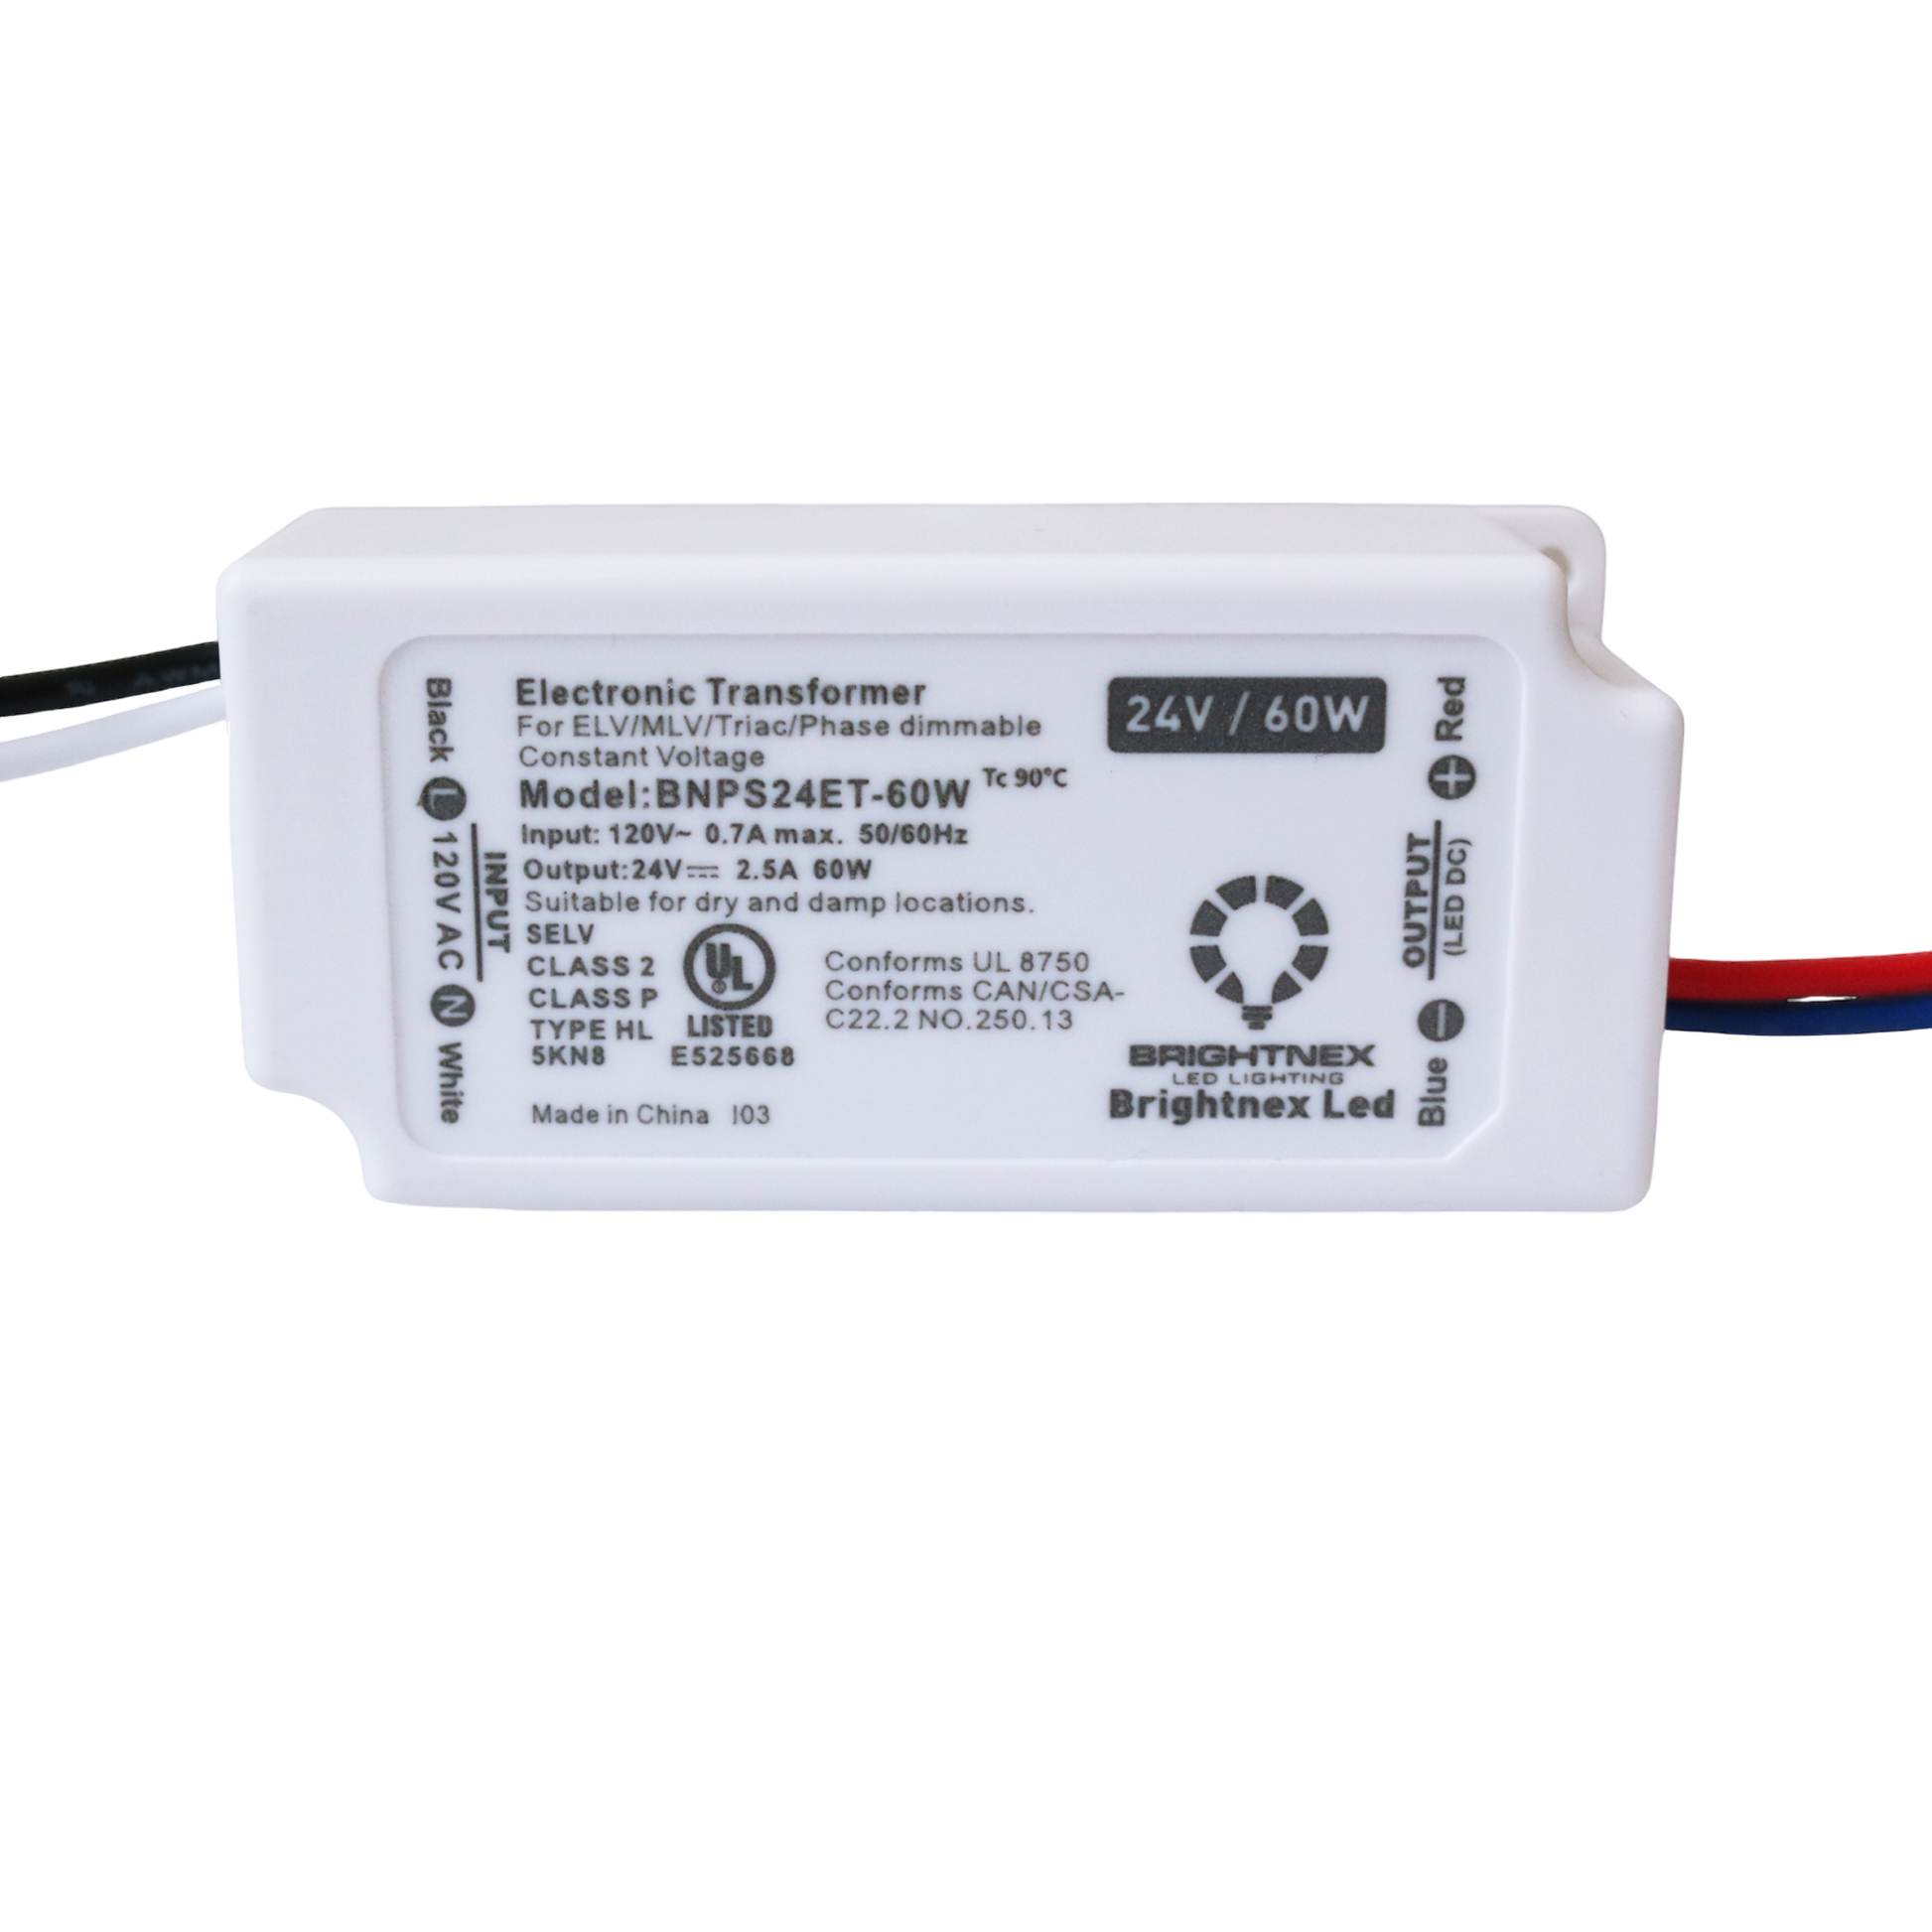 Small (Compact) Dimmable LED Driver (Dimmable LED Transformer), 24V, 60W